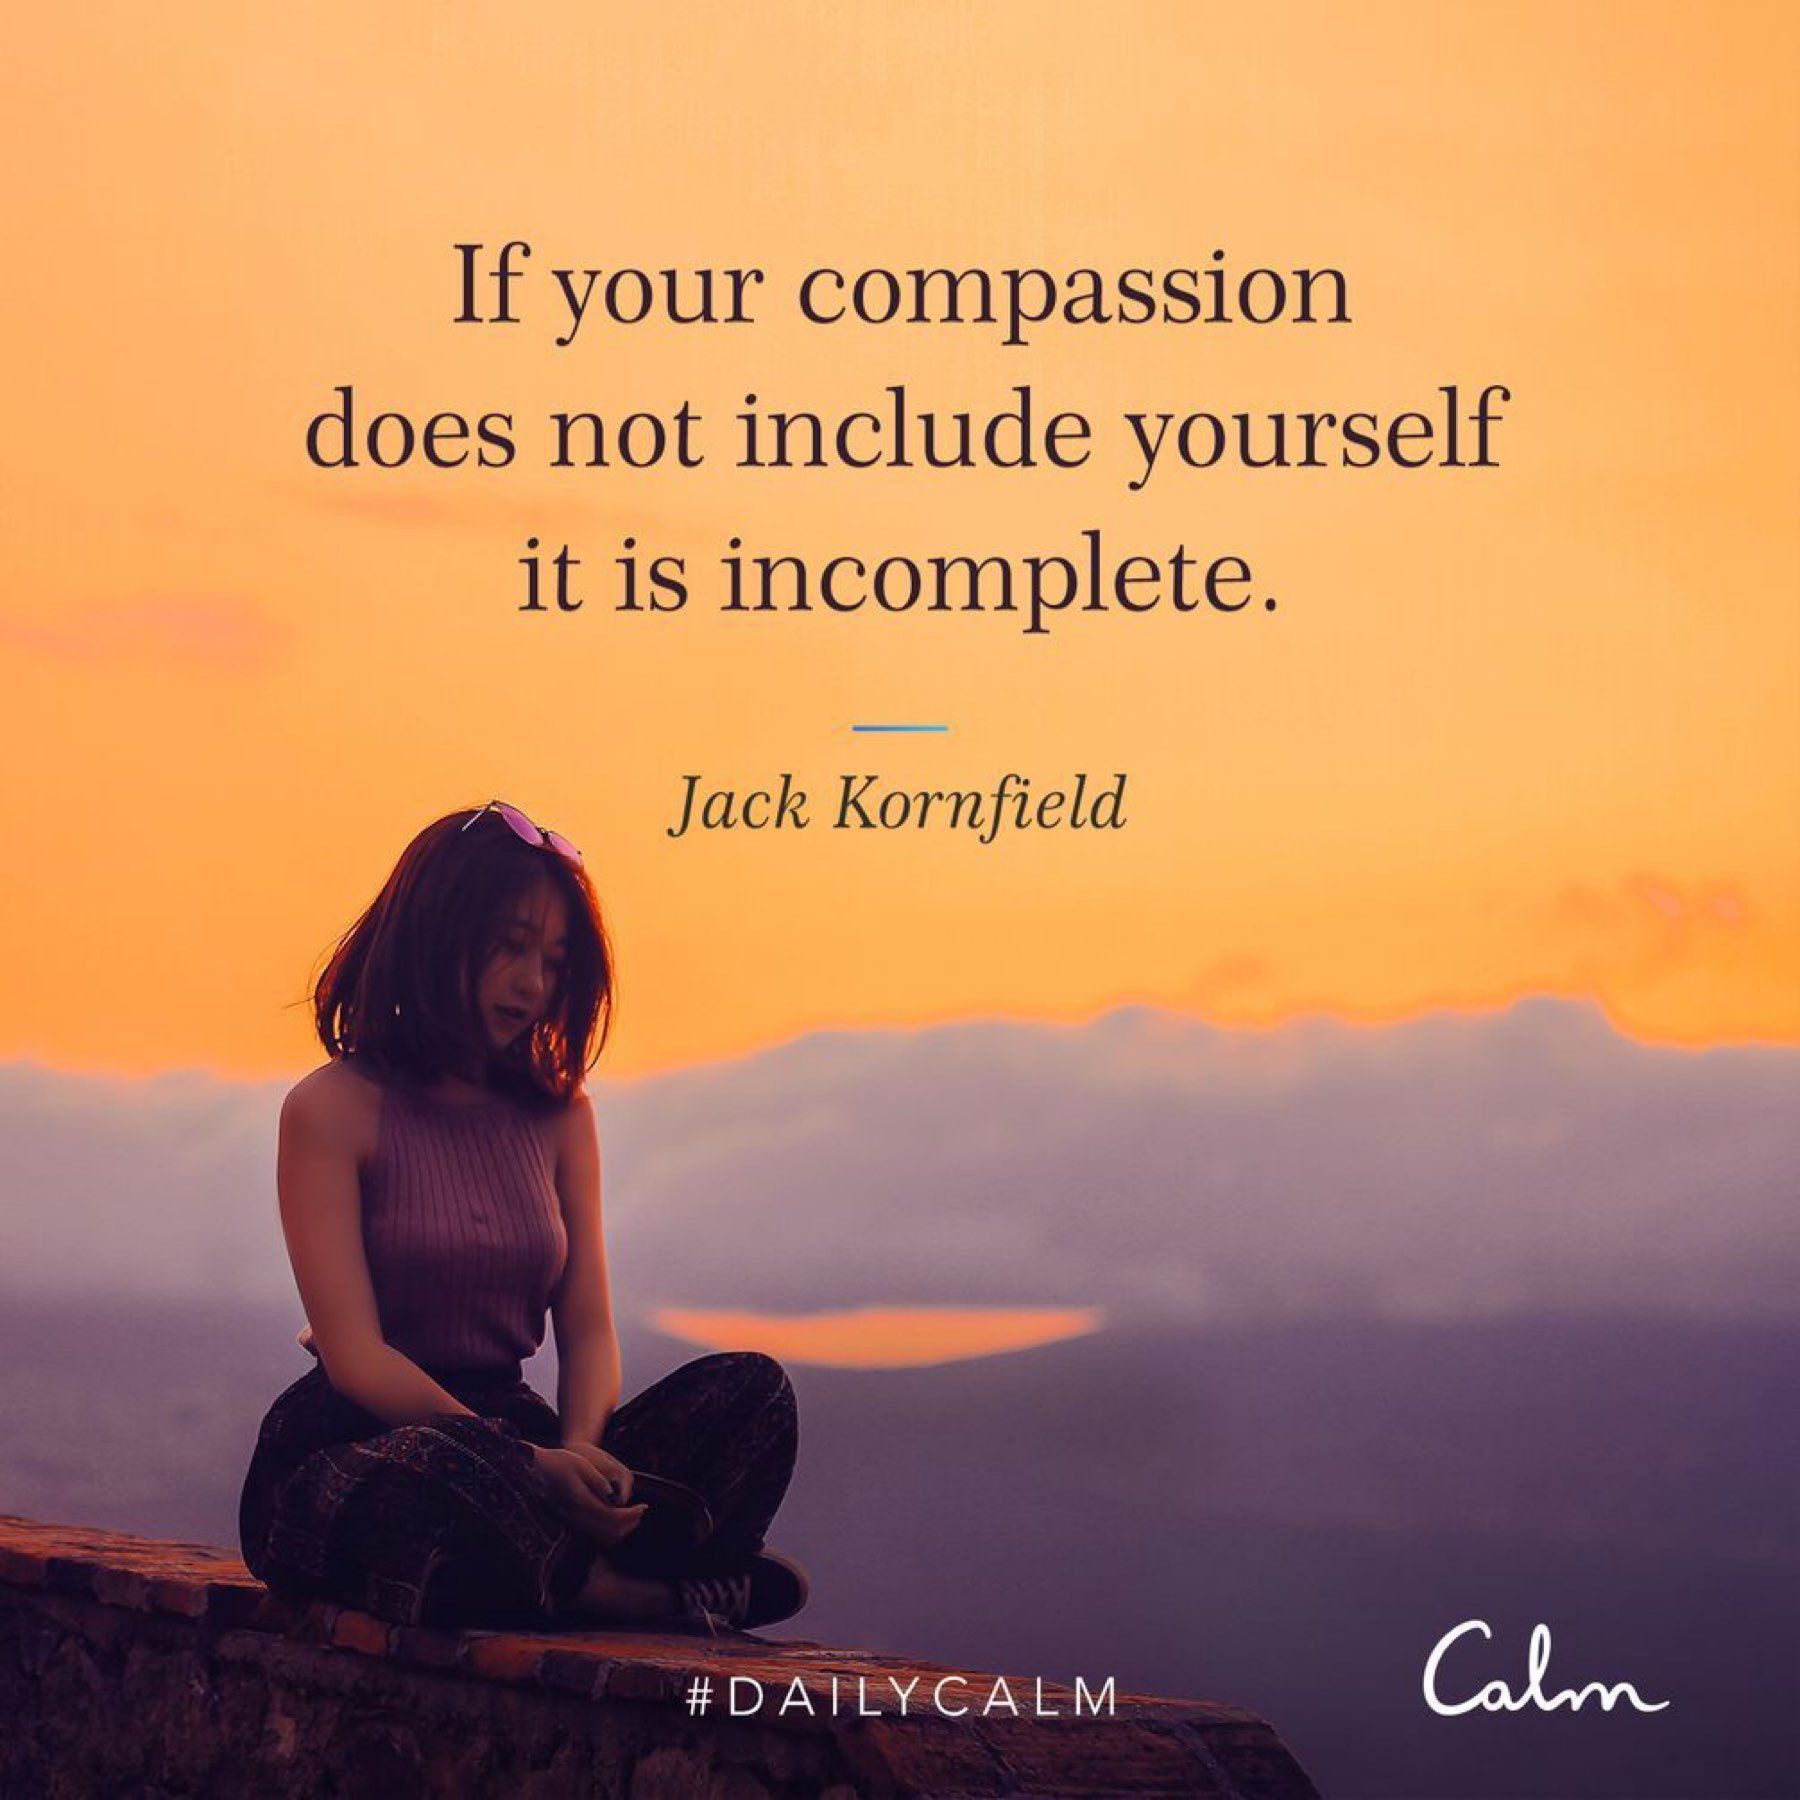 Complete compassion includes yourself